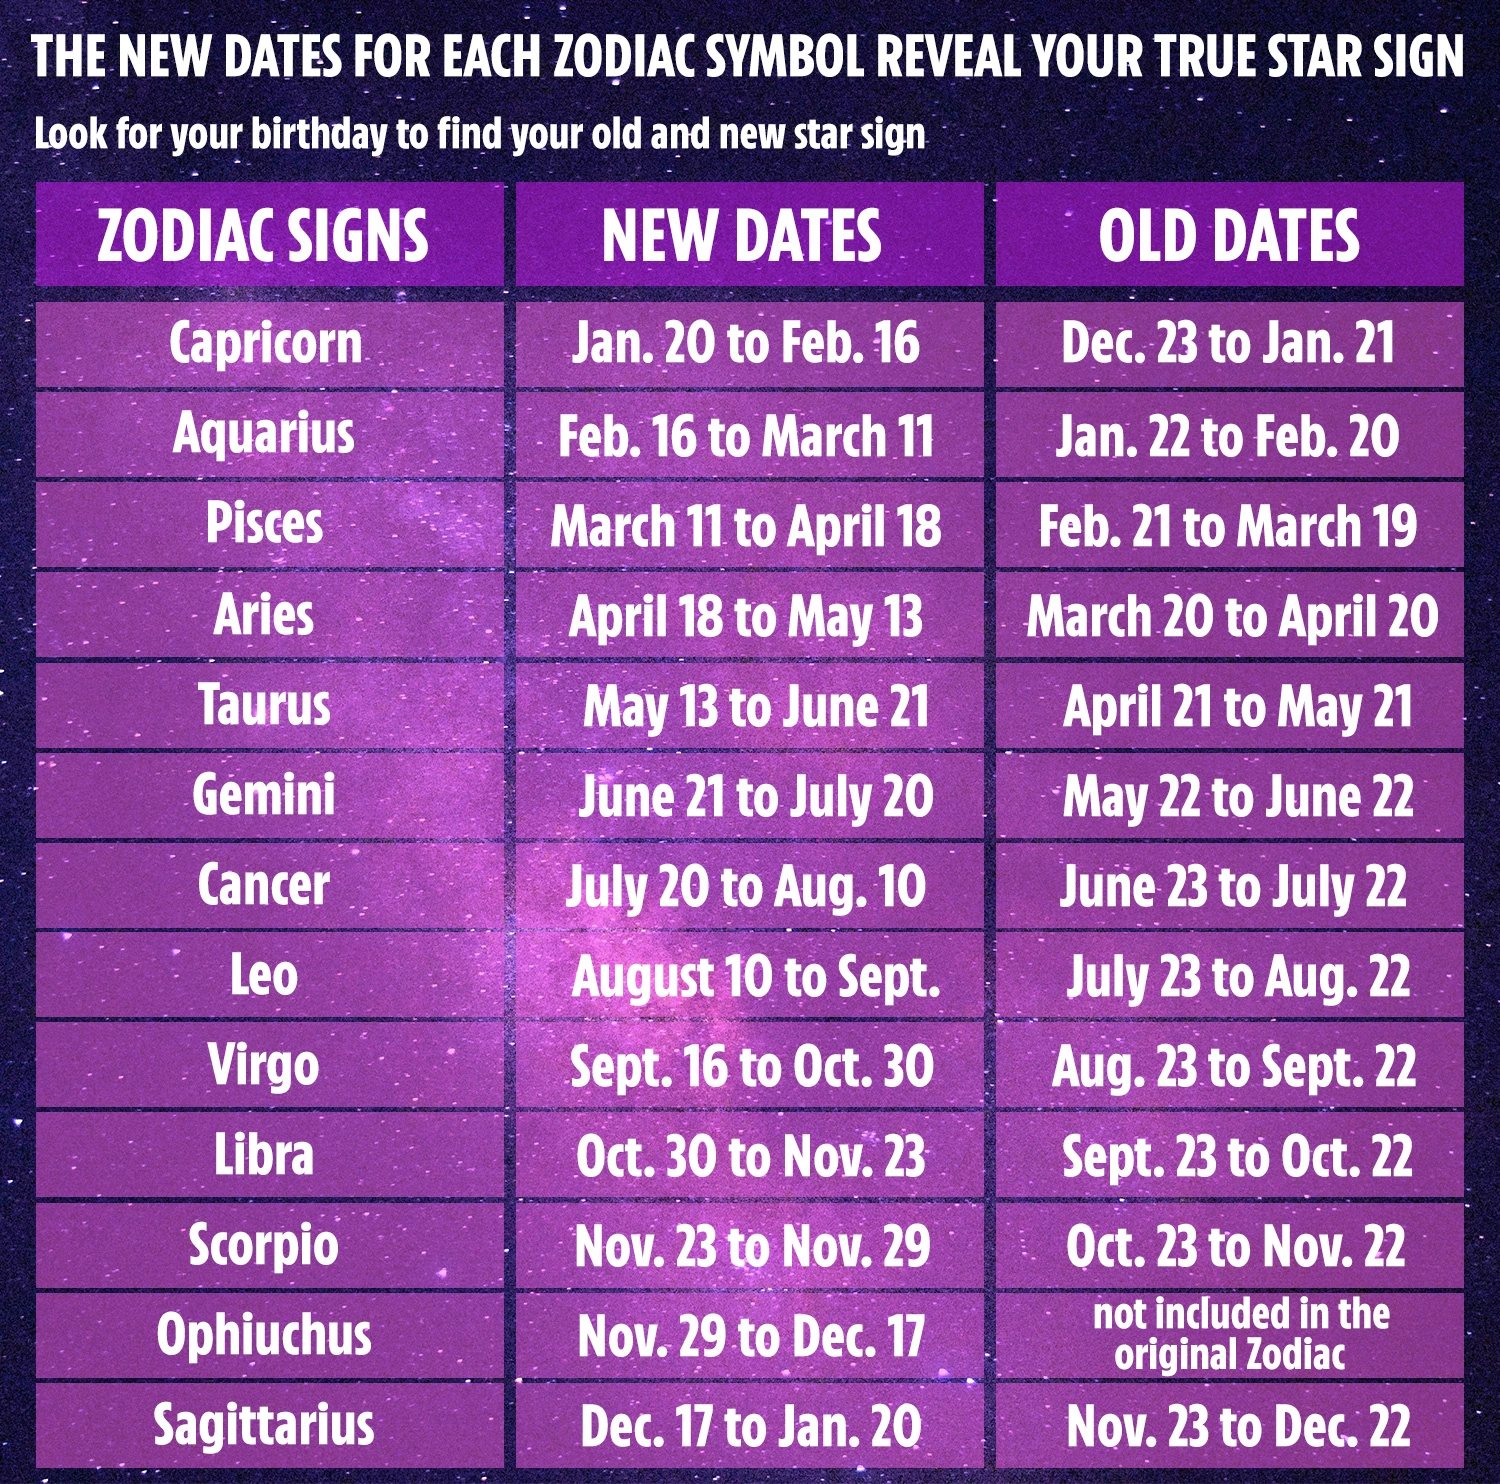 What Is The Current Zodiac Sign?